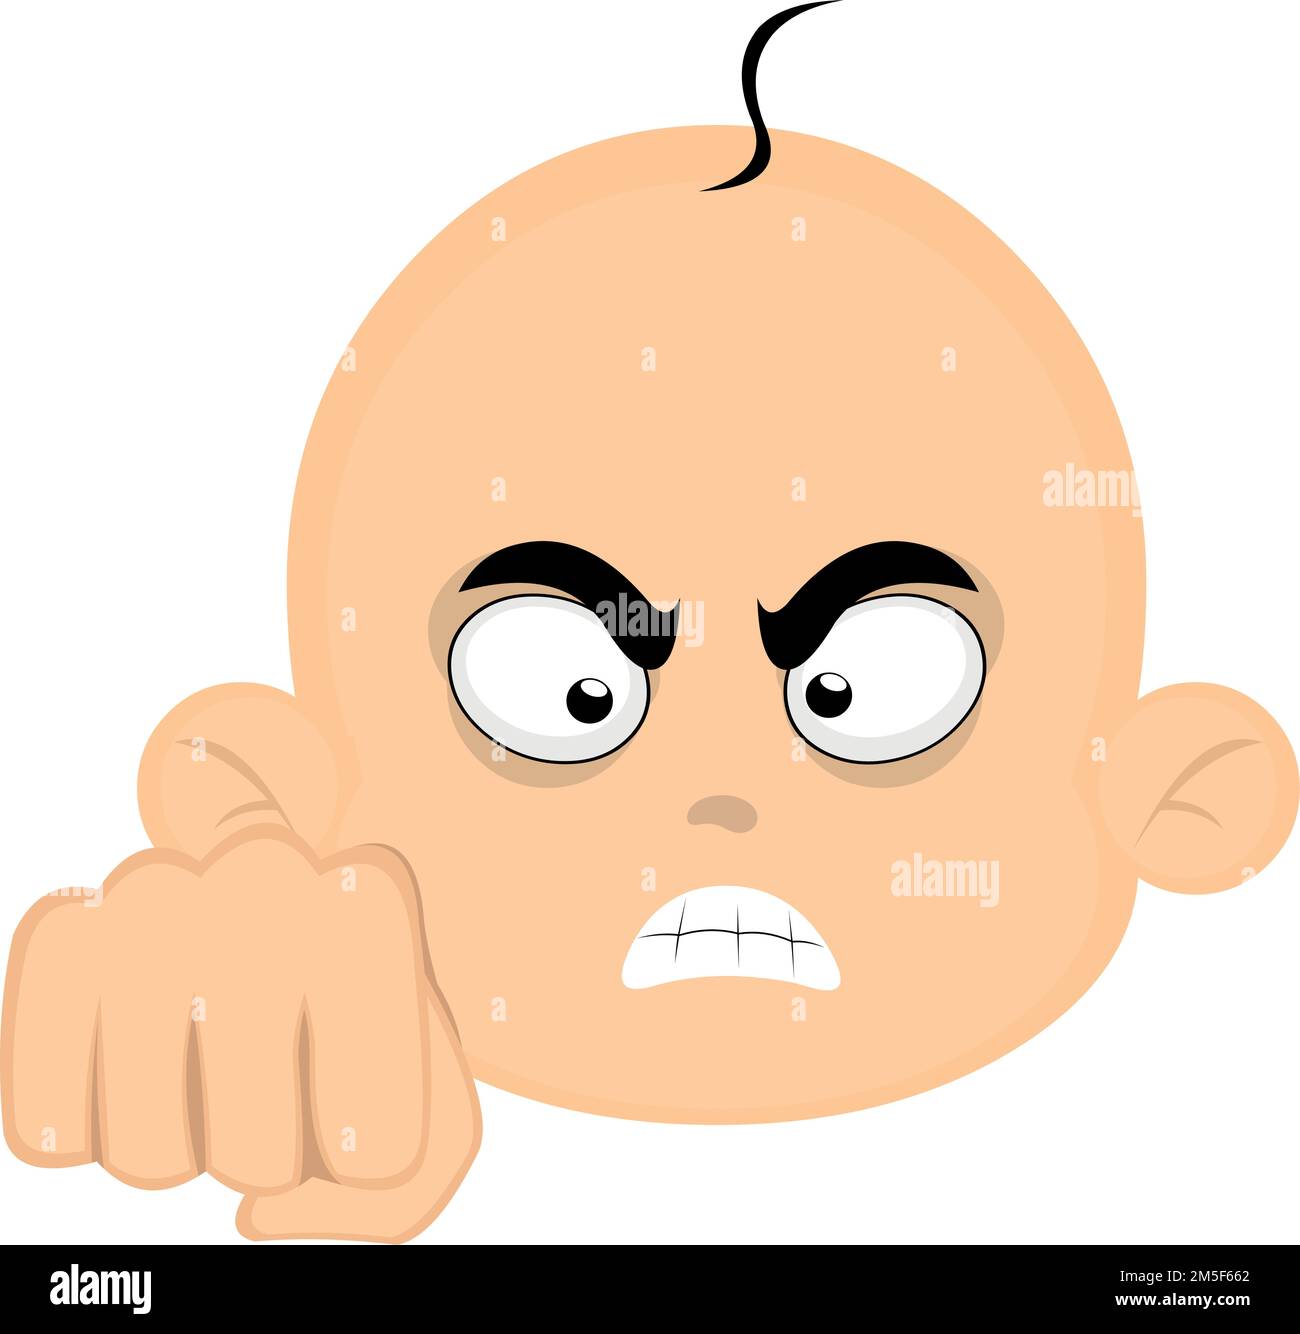 vector illustration of the face of a baby cartoon with an angry expression and giving a fist bump Stock Vector